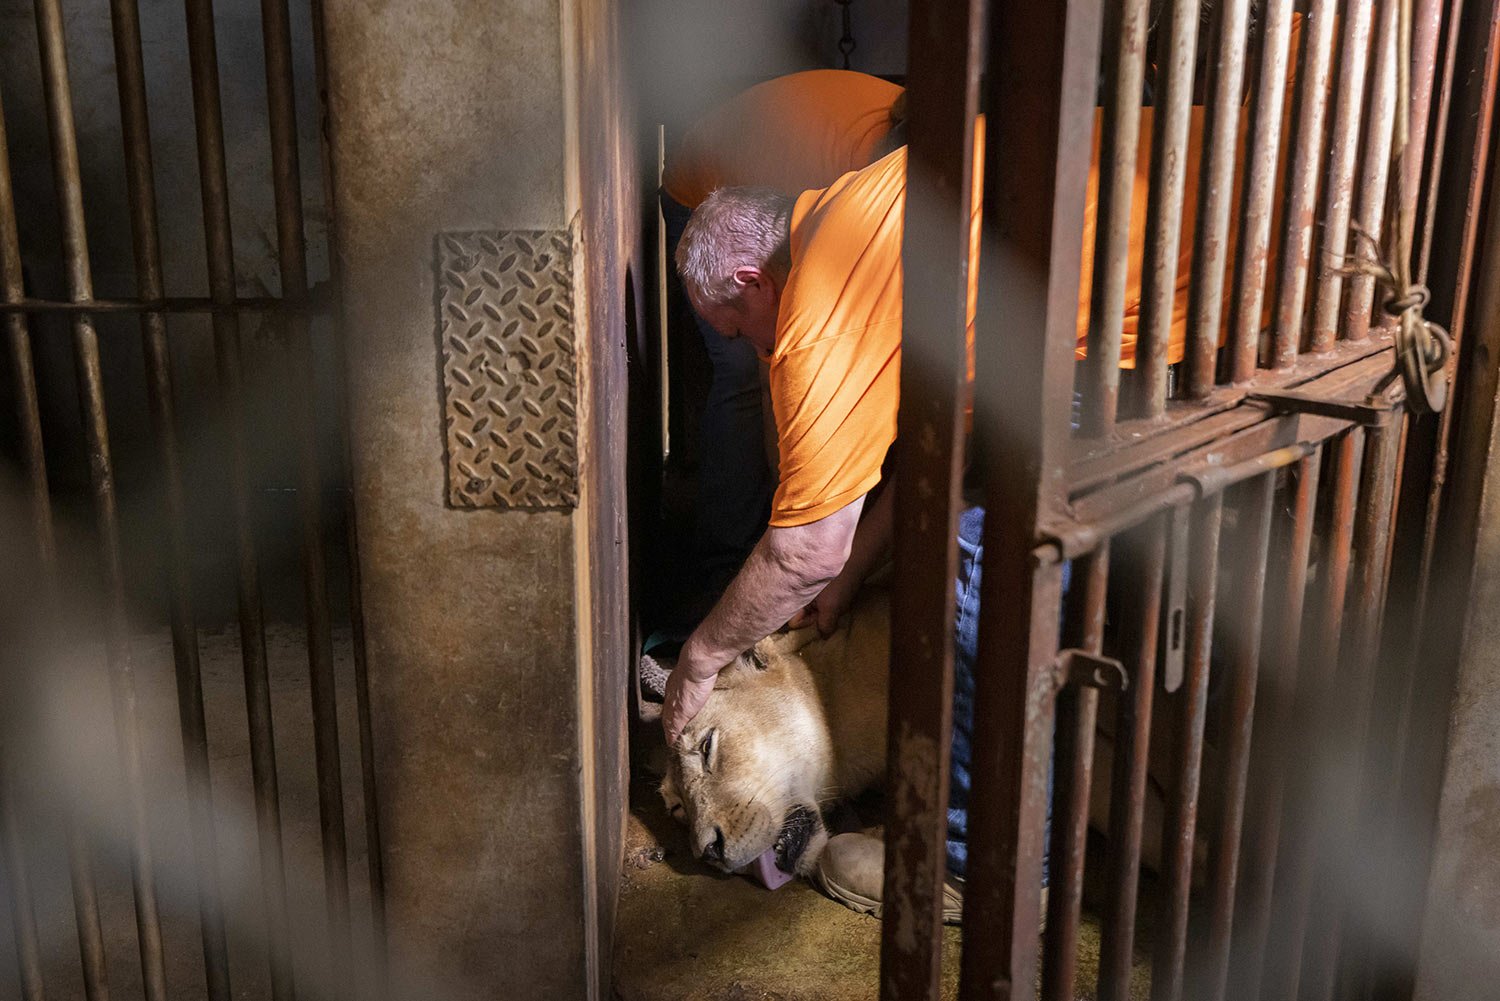  Patrick Craig, from The Wild Animal Sanctuary in Colorado, looks after a sedated lion before its transfer from Puerto Rico's only zoo that is closing in Mayaguez, Puerto Rico, April 28, 2023. The territory's only zoo is closing after years of suspec